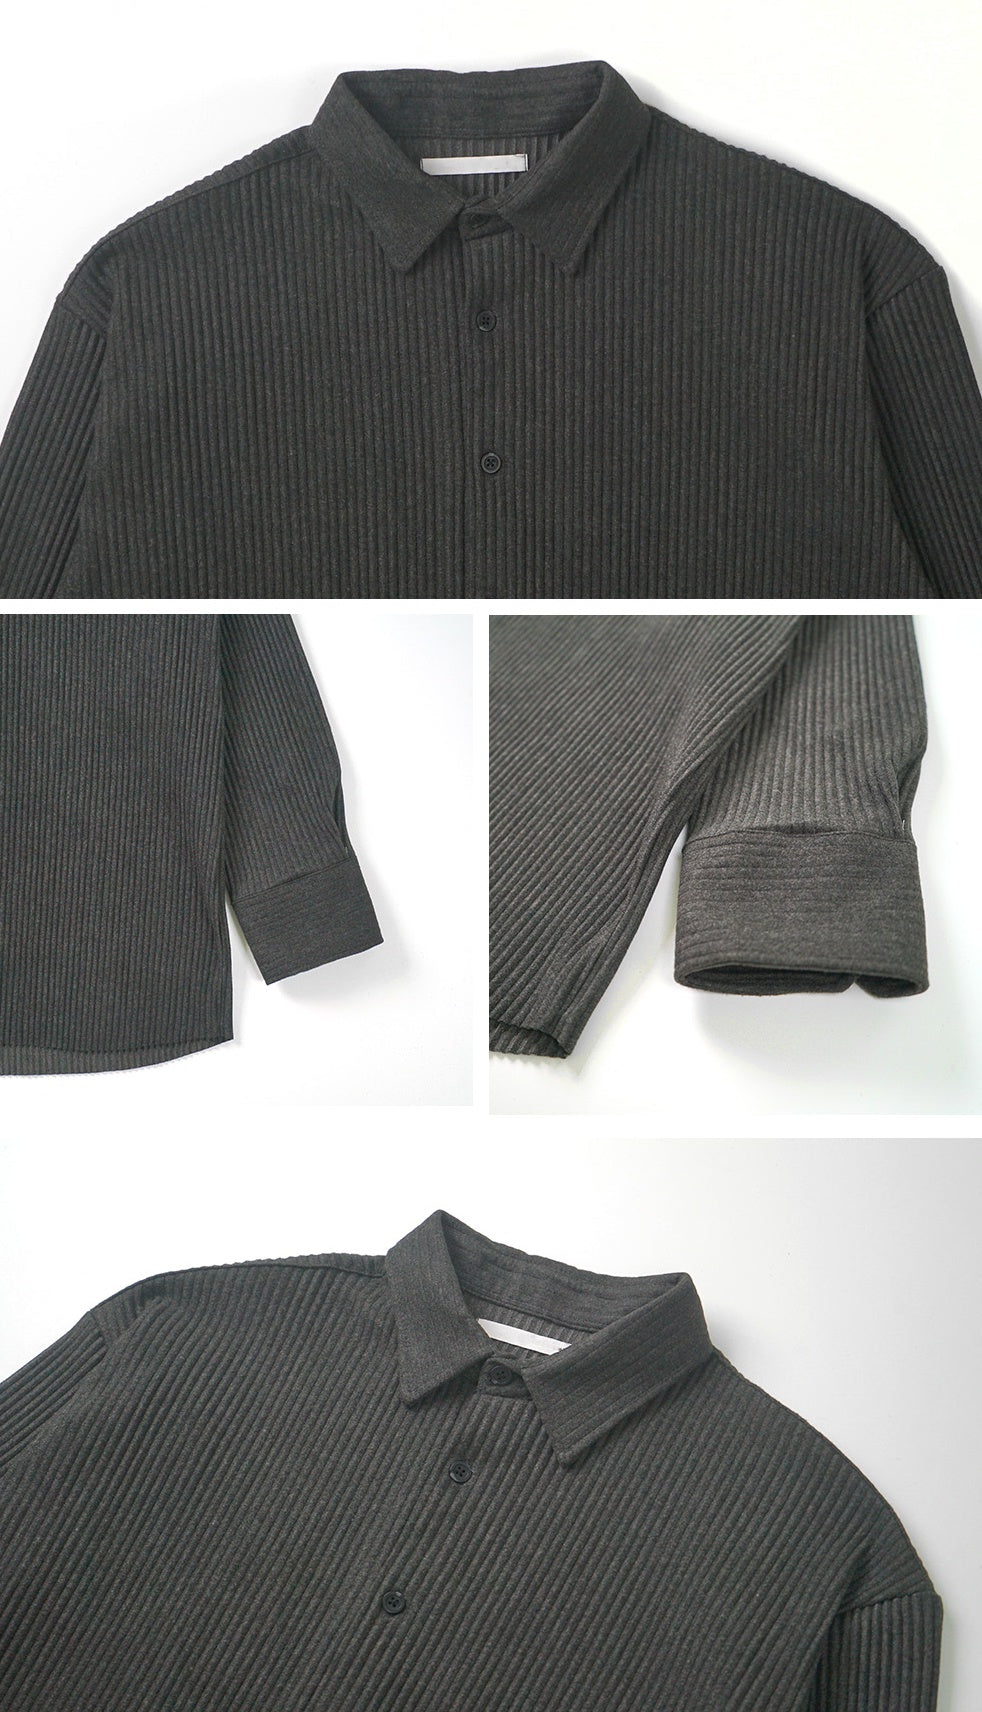 Charcoal Pleated Casual Shirts Mens Button Front Wool Blend Tops Korea